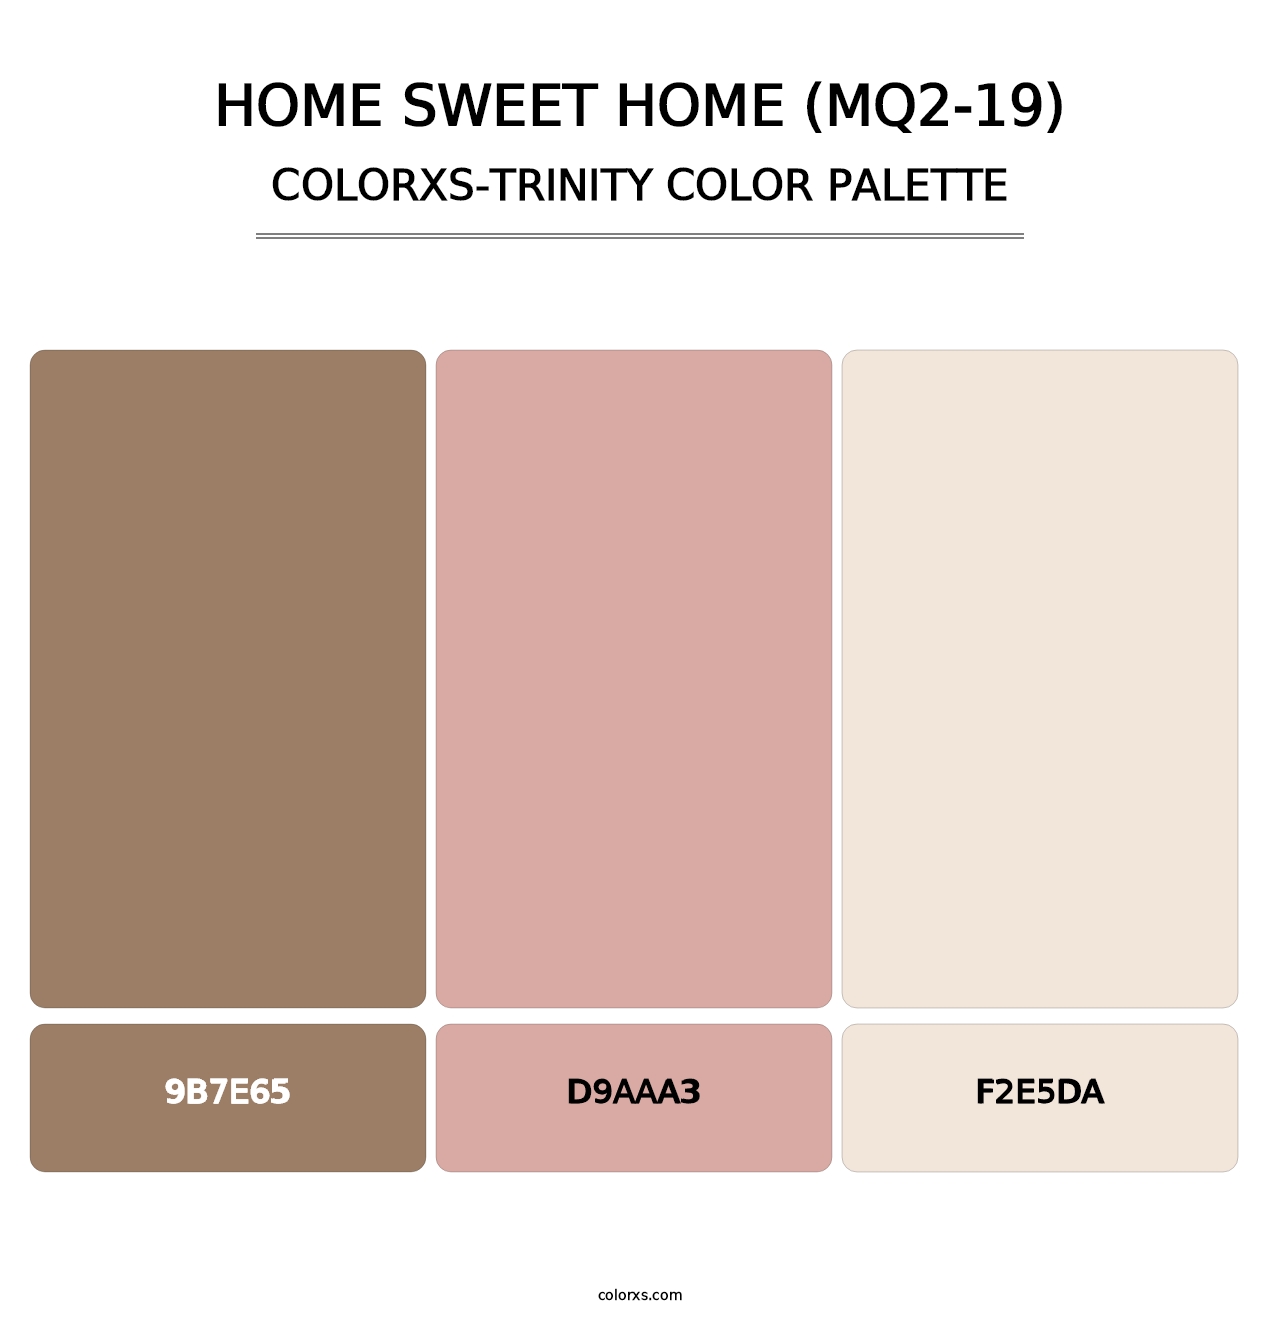 Home Sweet Home (MQ2-19) - Colorxs Trinity Palette